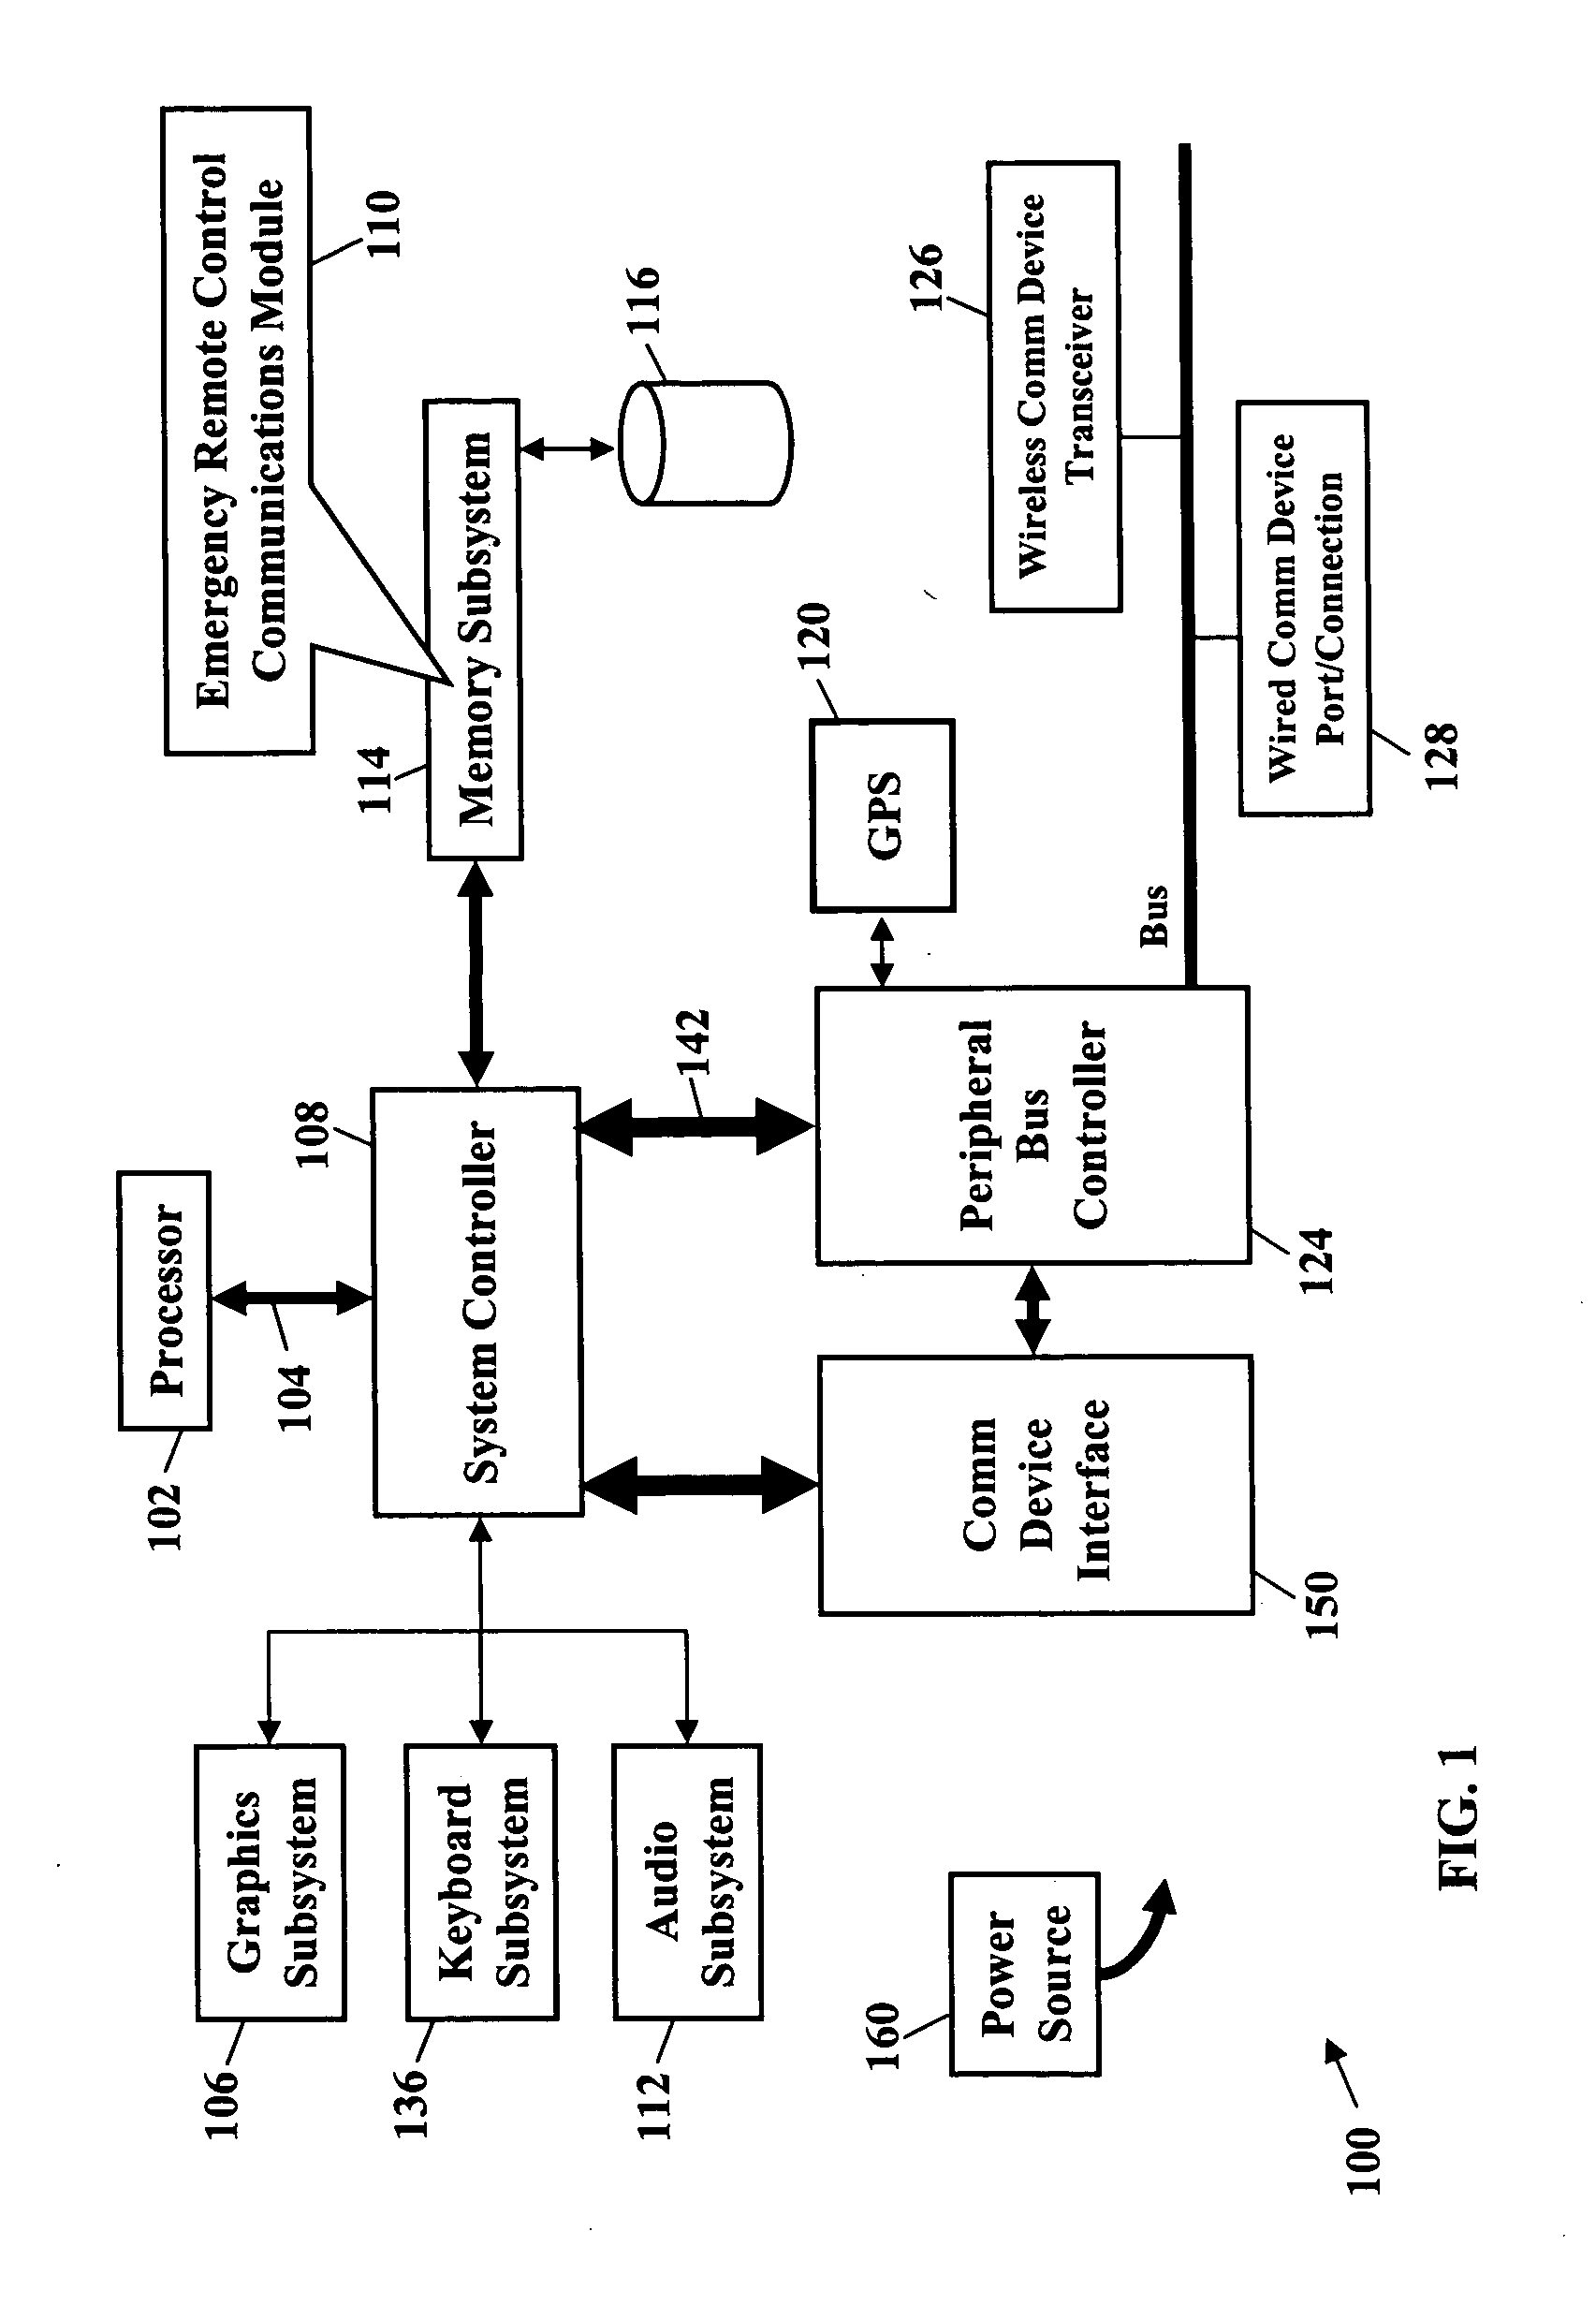 Method and system for emergency control of a voice/data communications device